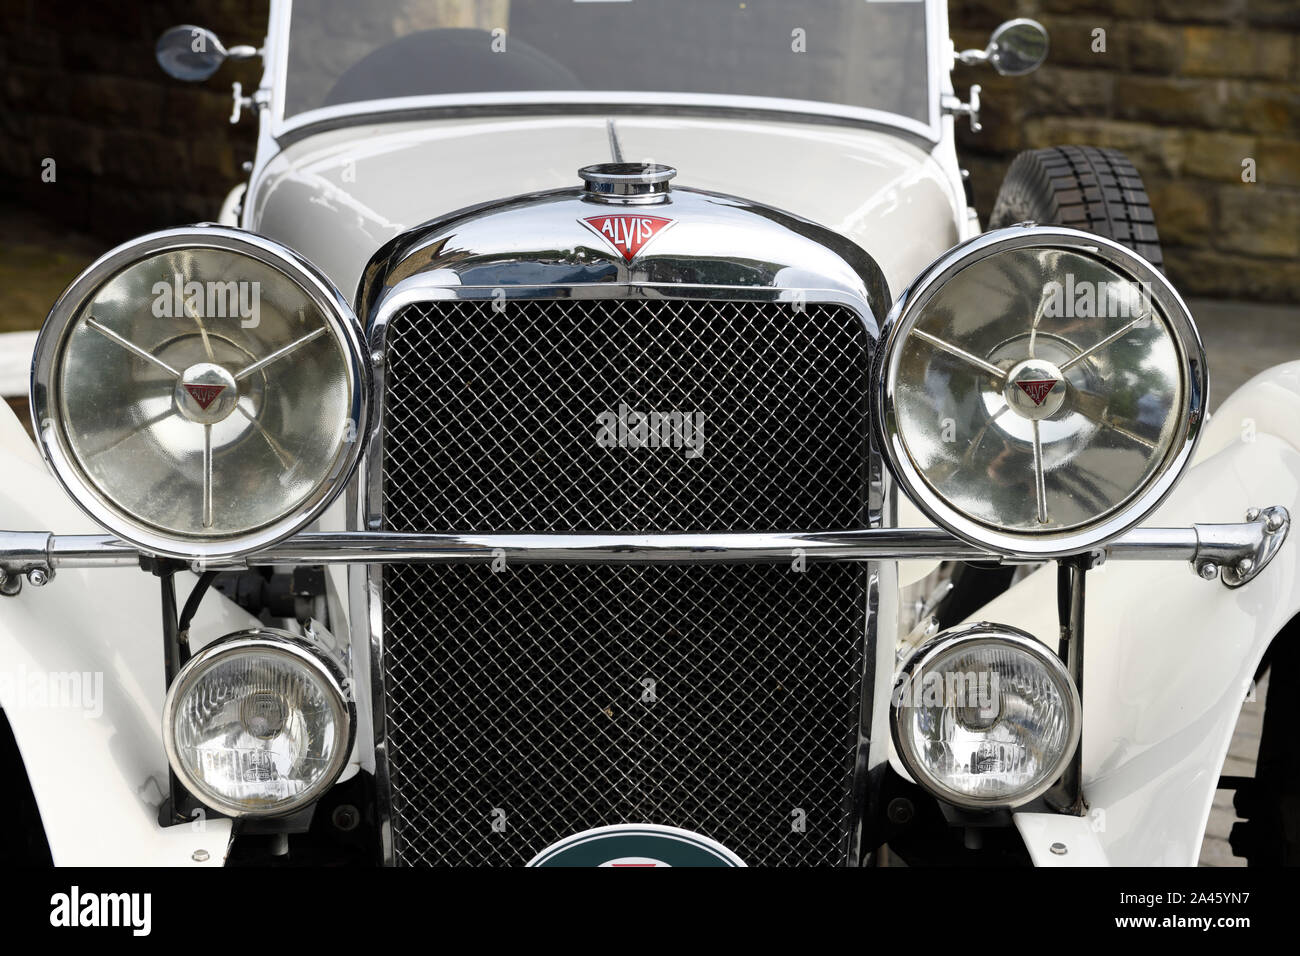 Front grill and headlights of a white mid 1930s Alvis Speed 20 classic car at Goathland railway station North Yorkshire England Stock Photo